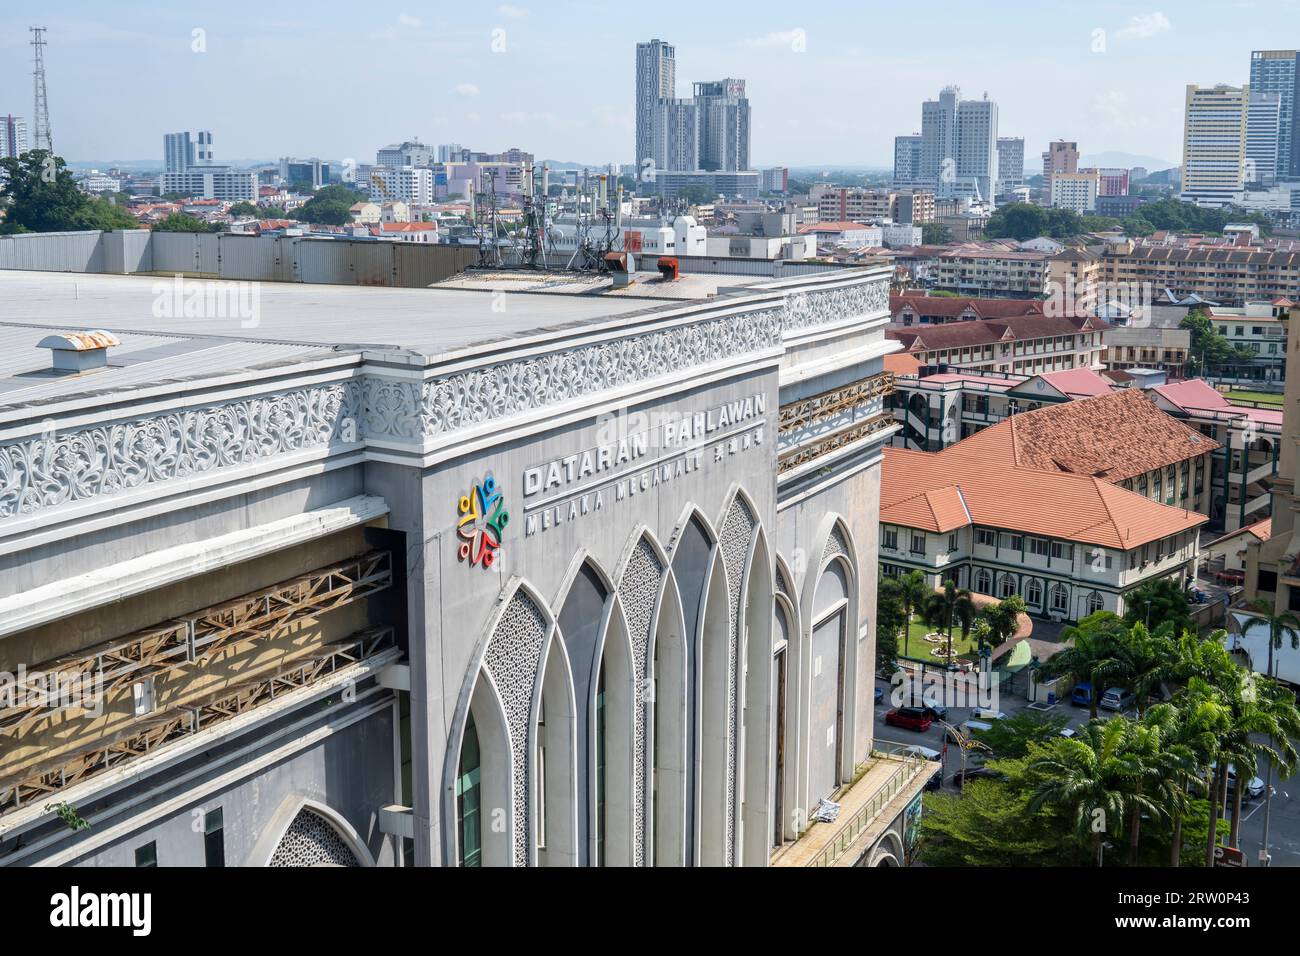 Dataran Pahlawan Melaka Megamall is a shopping mall located in Malacca City, Malacca, Malaysia. The biggest lifestyle shopping megamall in the state. Stock Photo